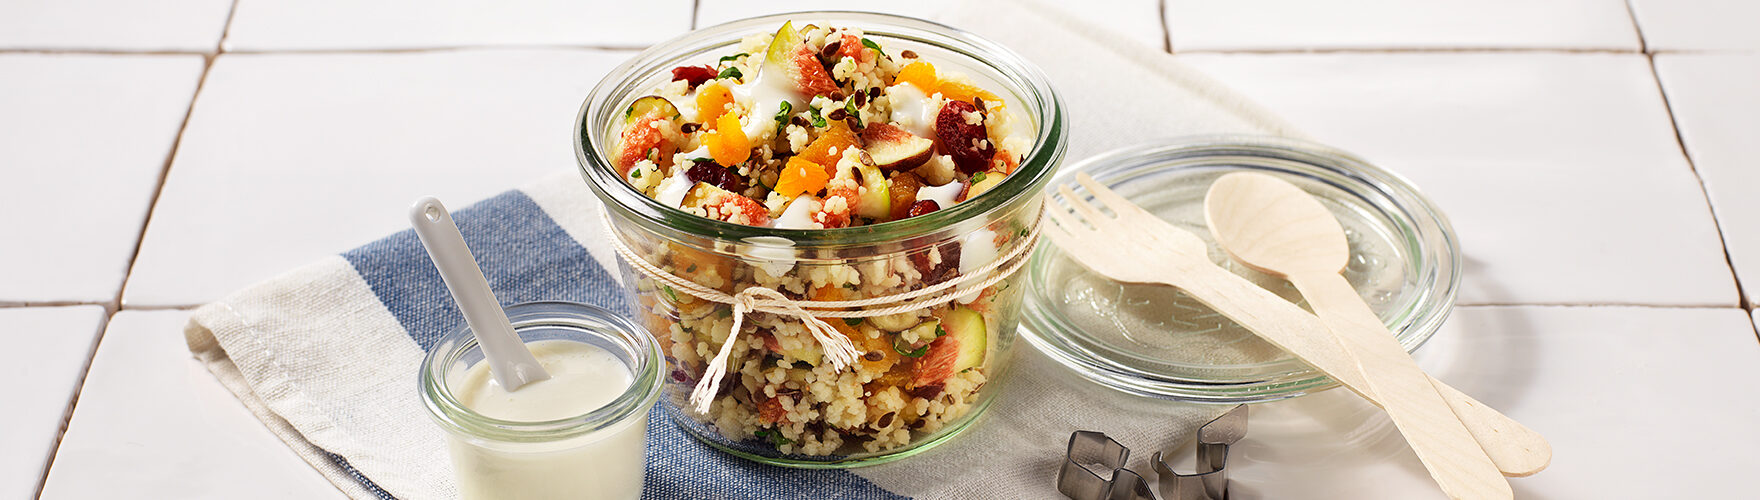 Fresh couscous salad with apricots, figs and mint